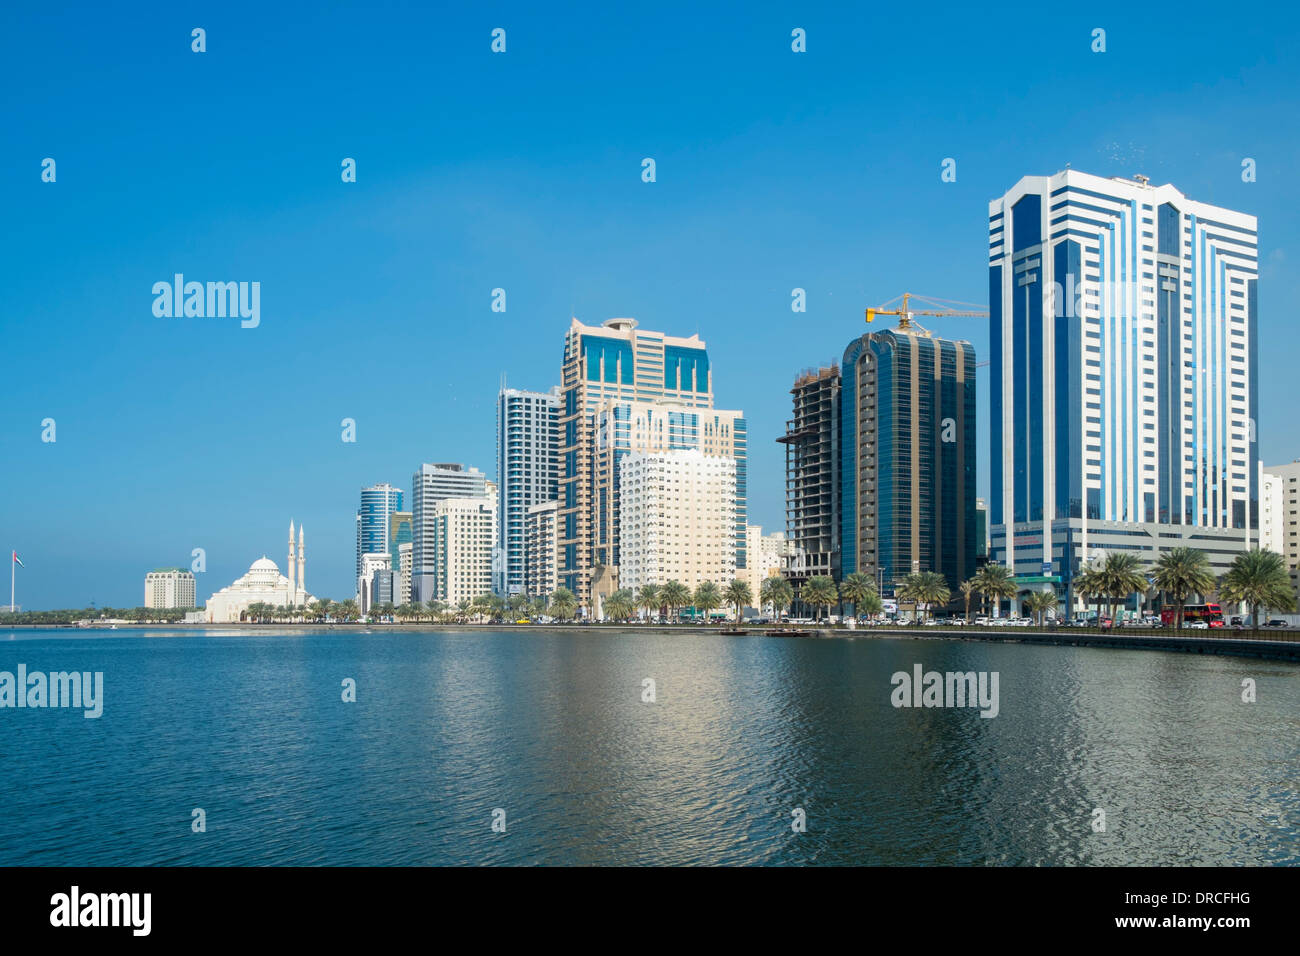 Skyline of Sharjah with modern high-rise buildings in in United Arab Emirates Stock Photo